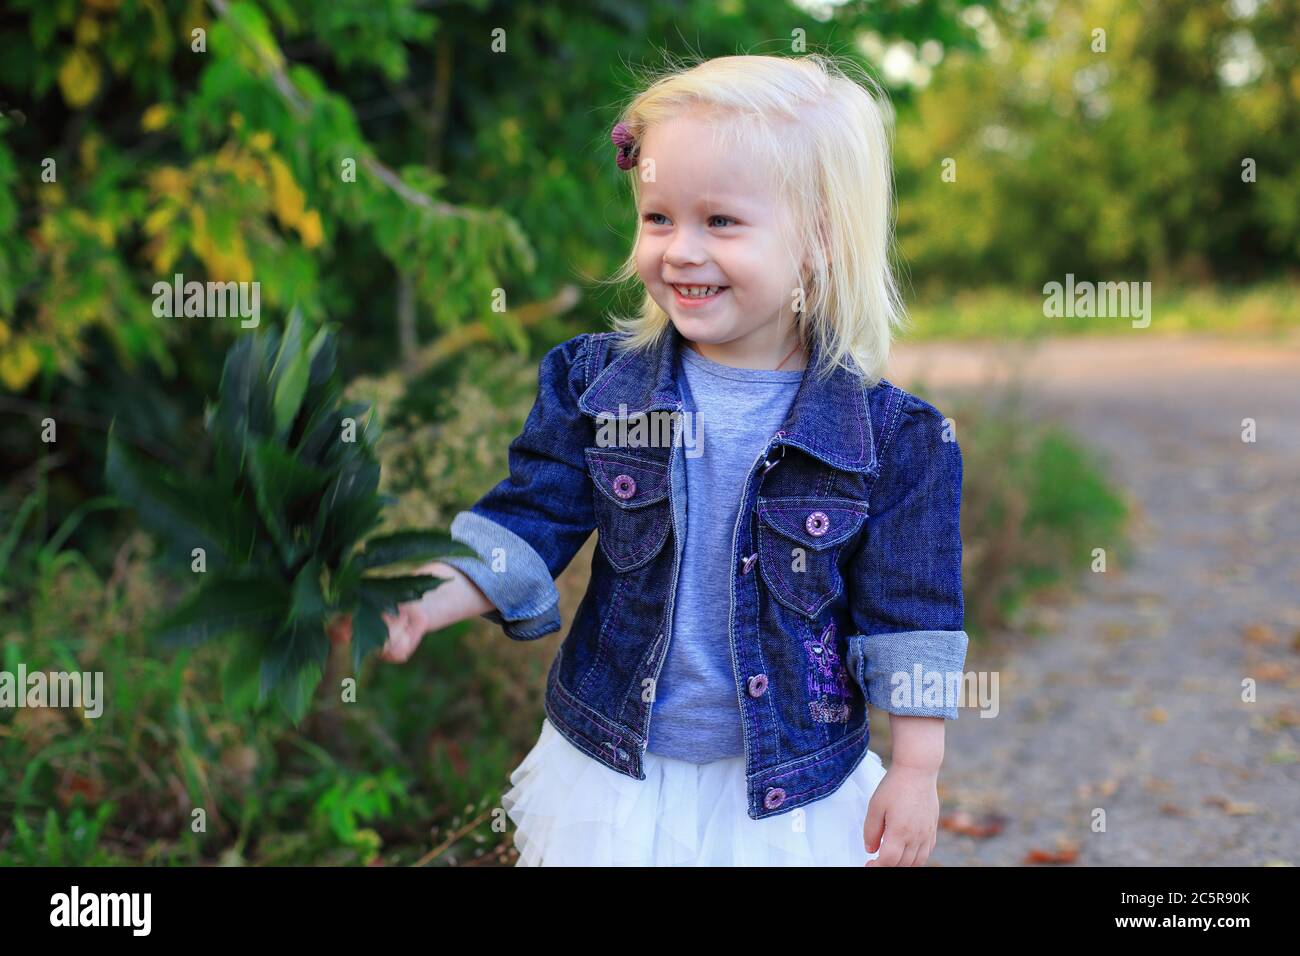 Portrait of a beautiful blonde girl outdoors in summer Stock Photo